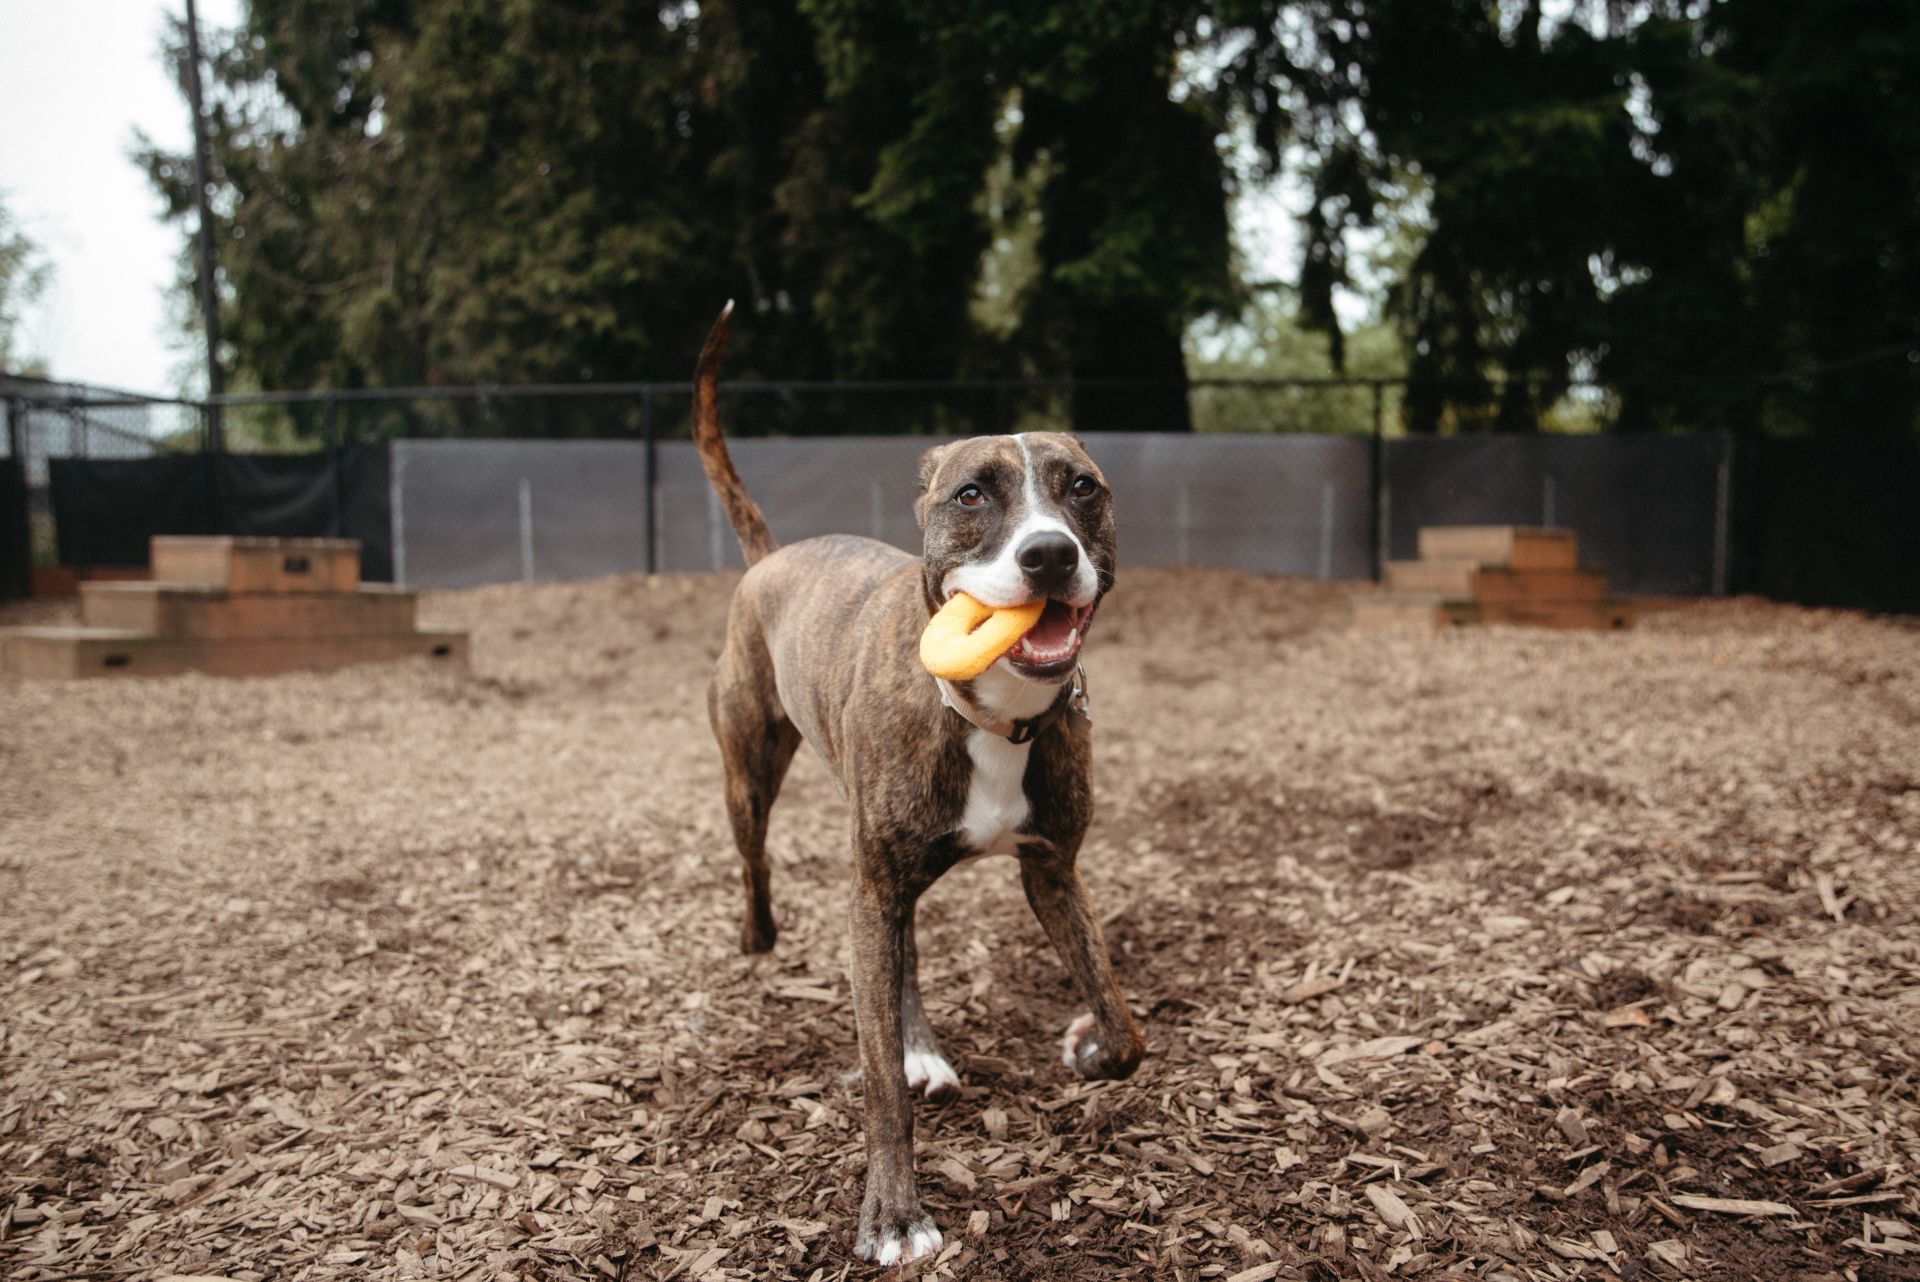 Leno the shelter dog playing with a toy